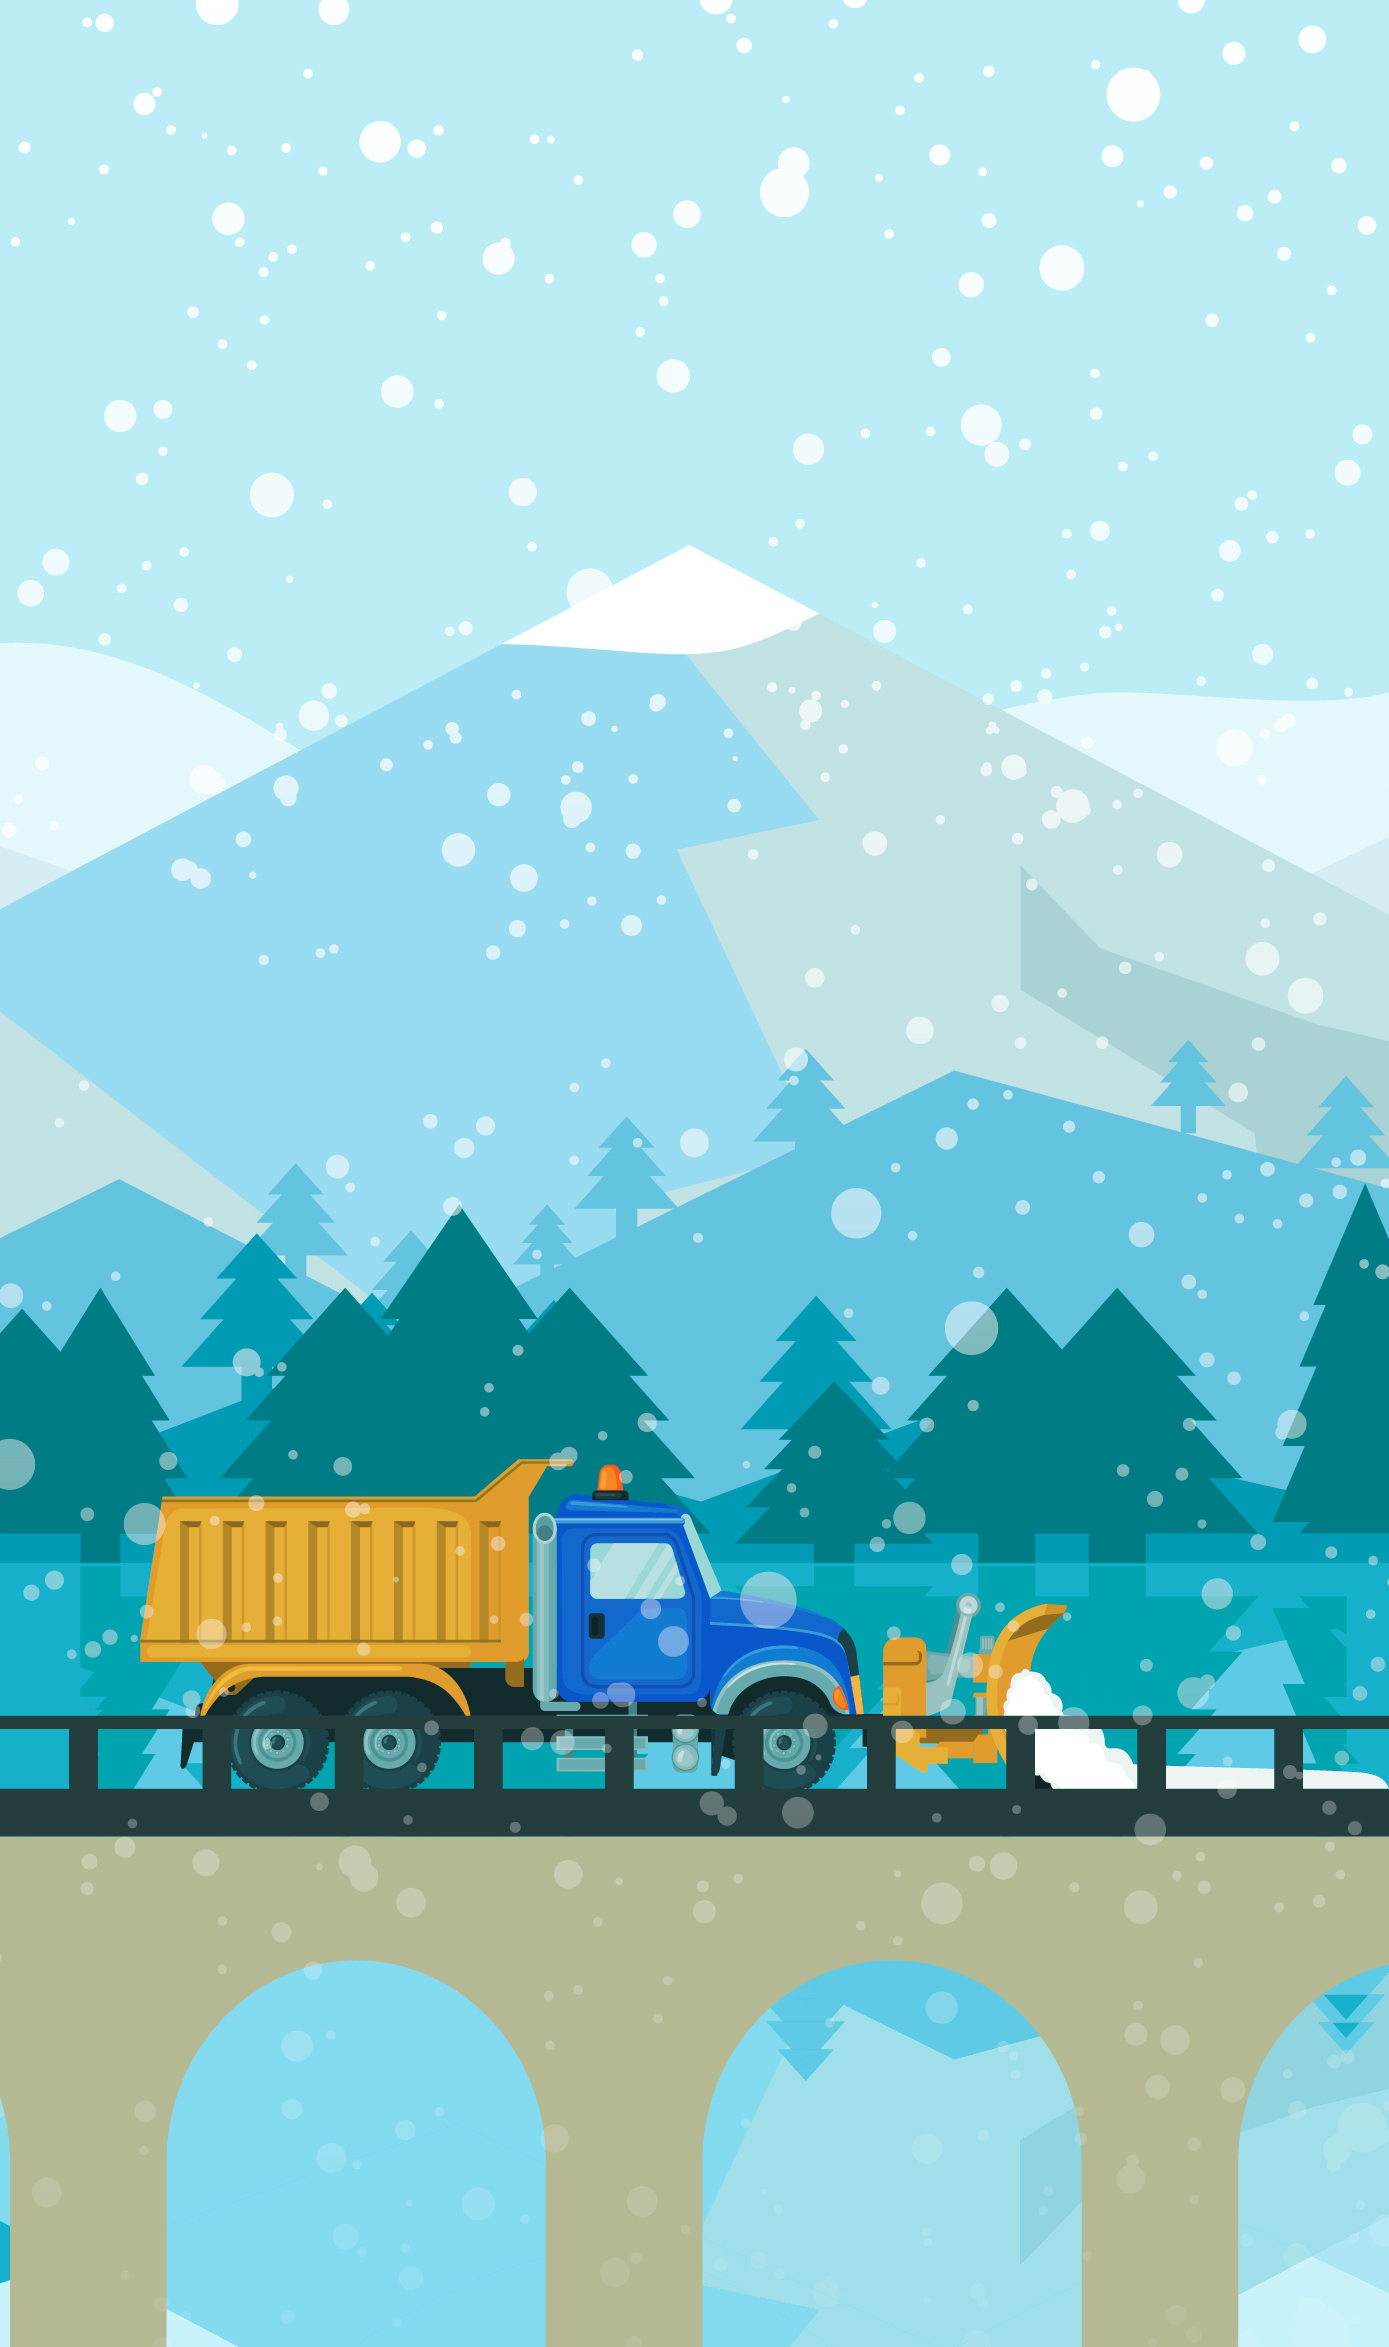 A graphic of a bridge being snowplowed in the winter.